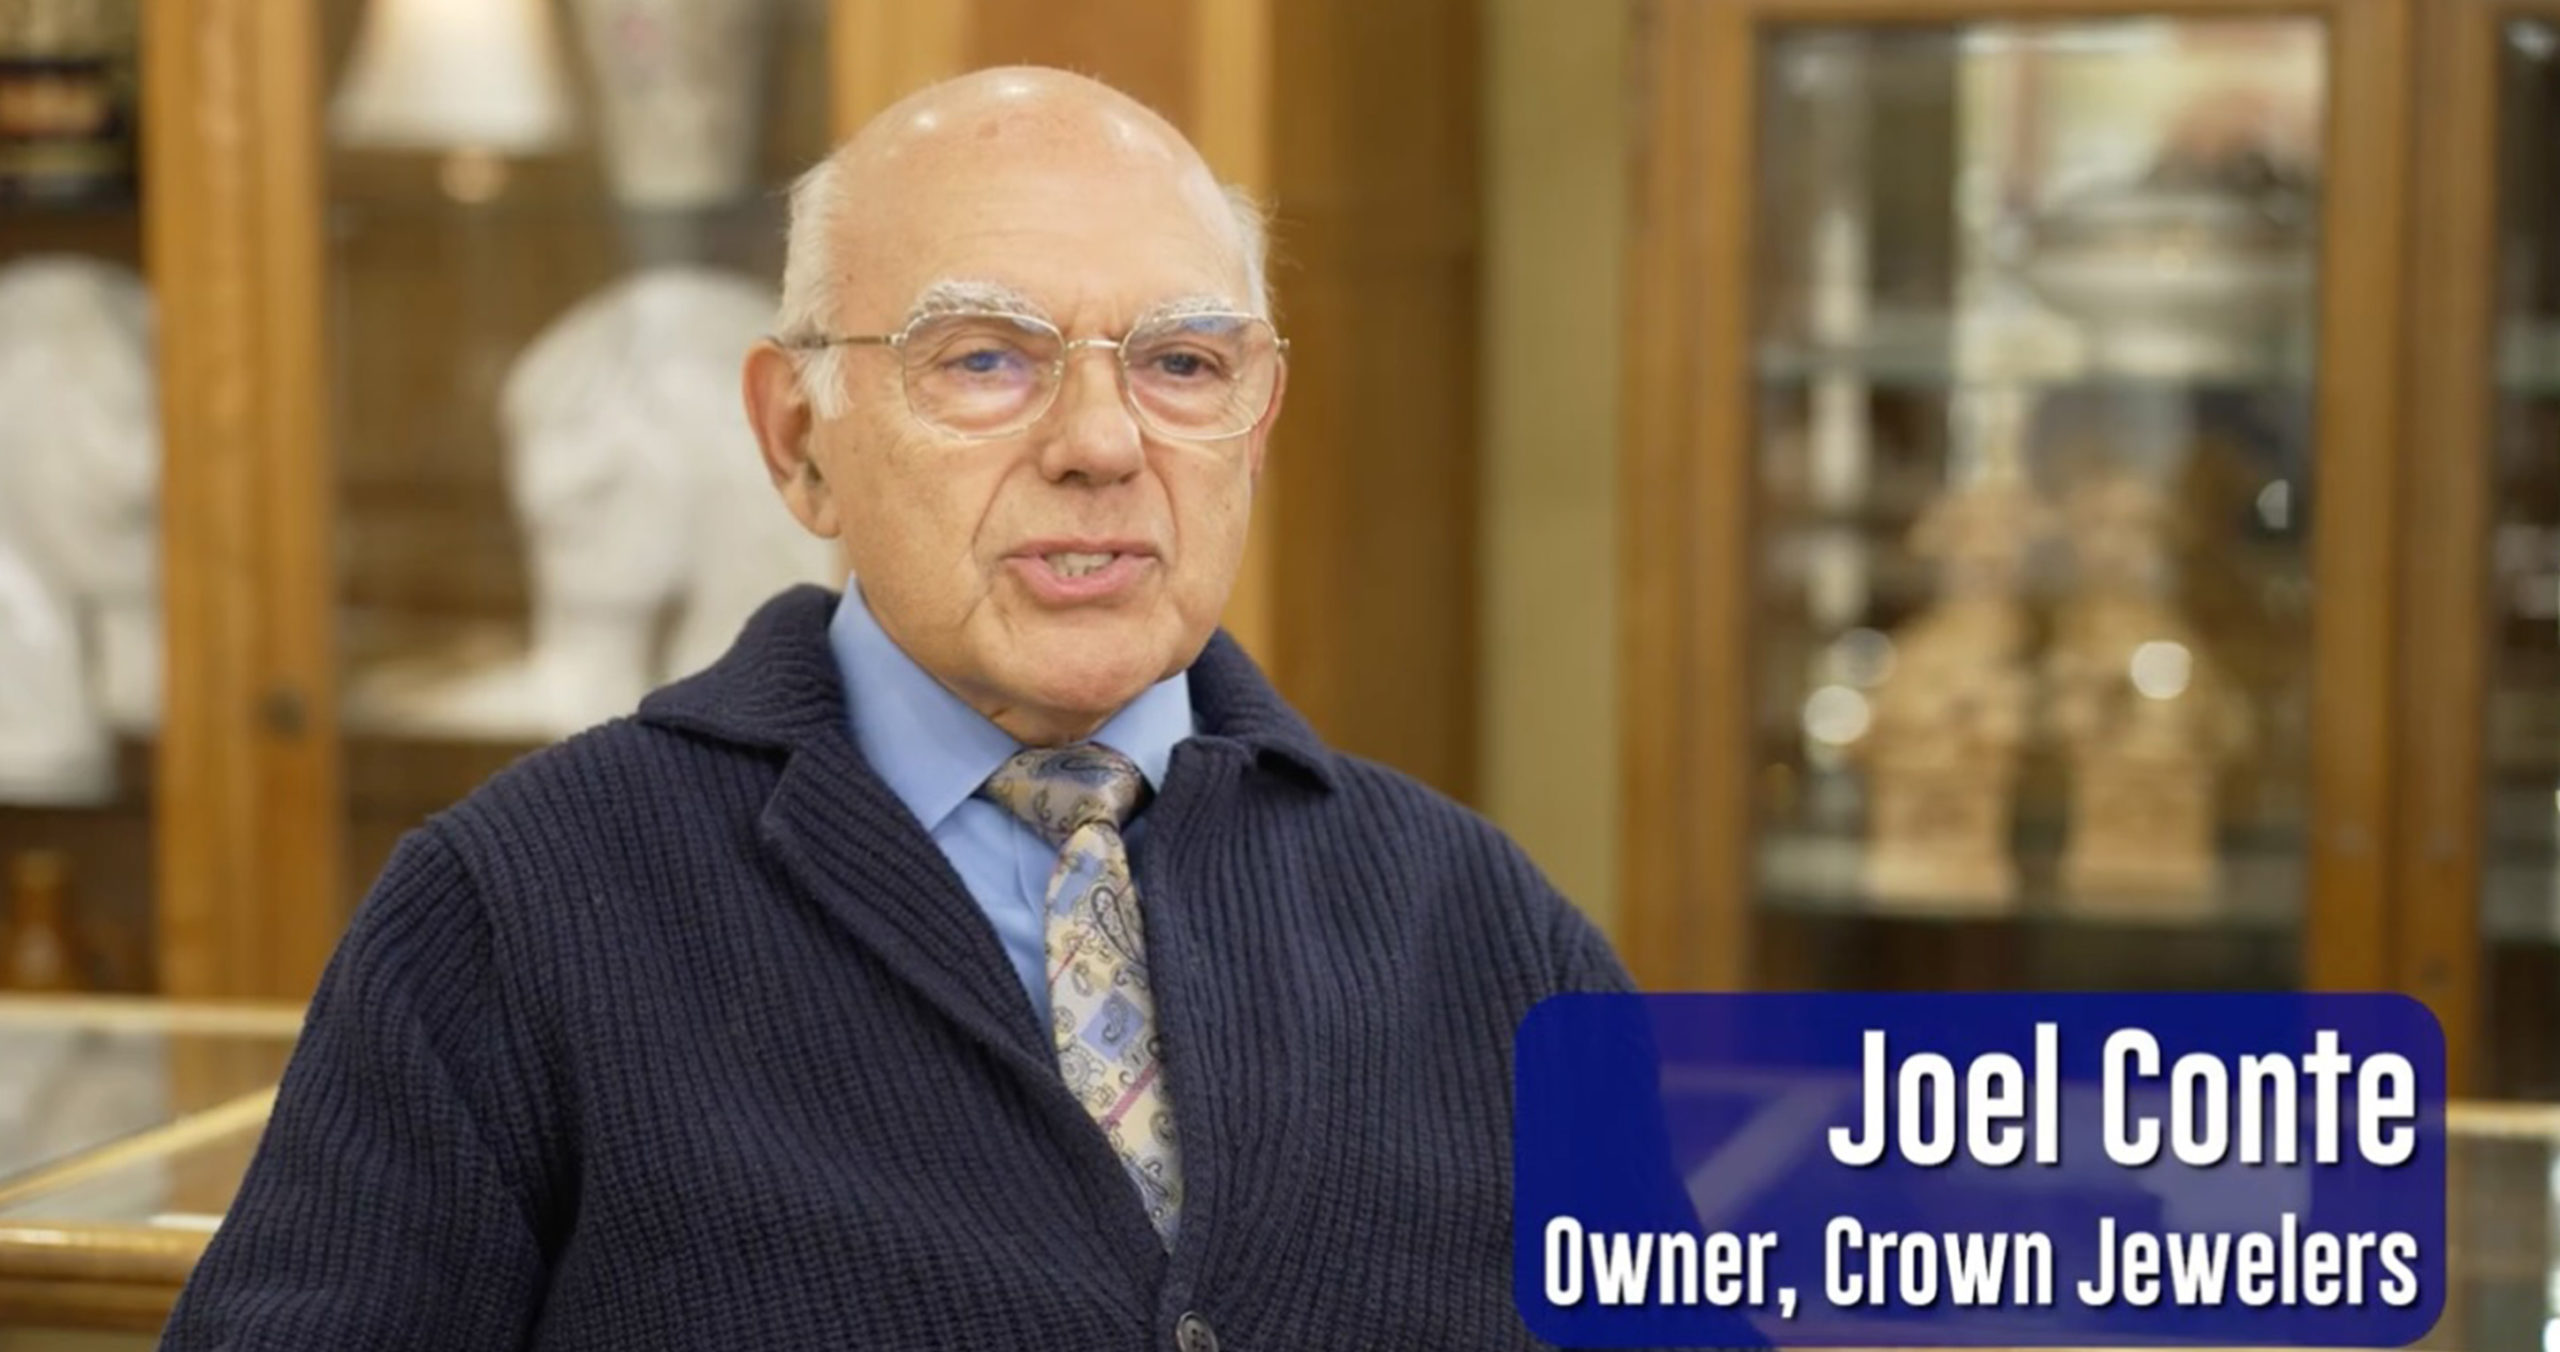 Still image from the video about the jewelry sale at Crown Jewelers